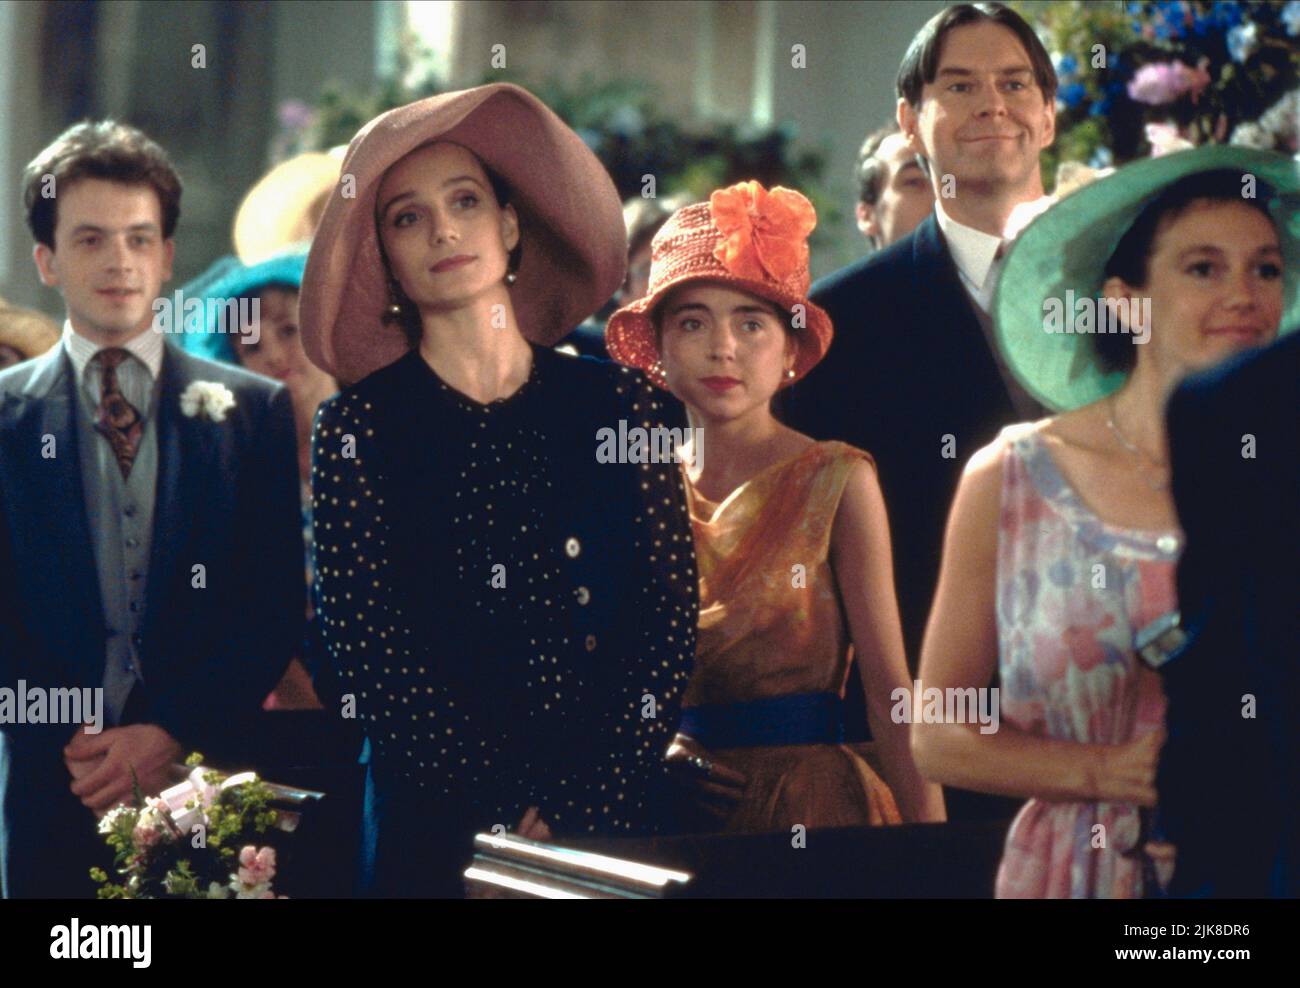 Kristin Scott Thomas & Charlotte Coleman Film: Four Weddings And A Funeral  (UK 1994) Characters: Fiona, Scarlett Director: Mike Newell 20 January 1994  **WARNING** This Photograph is for editorial use only and